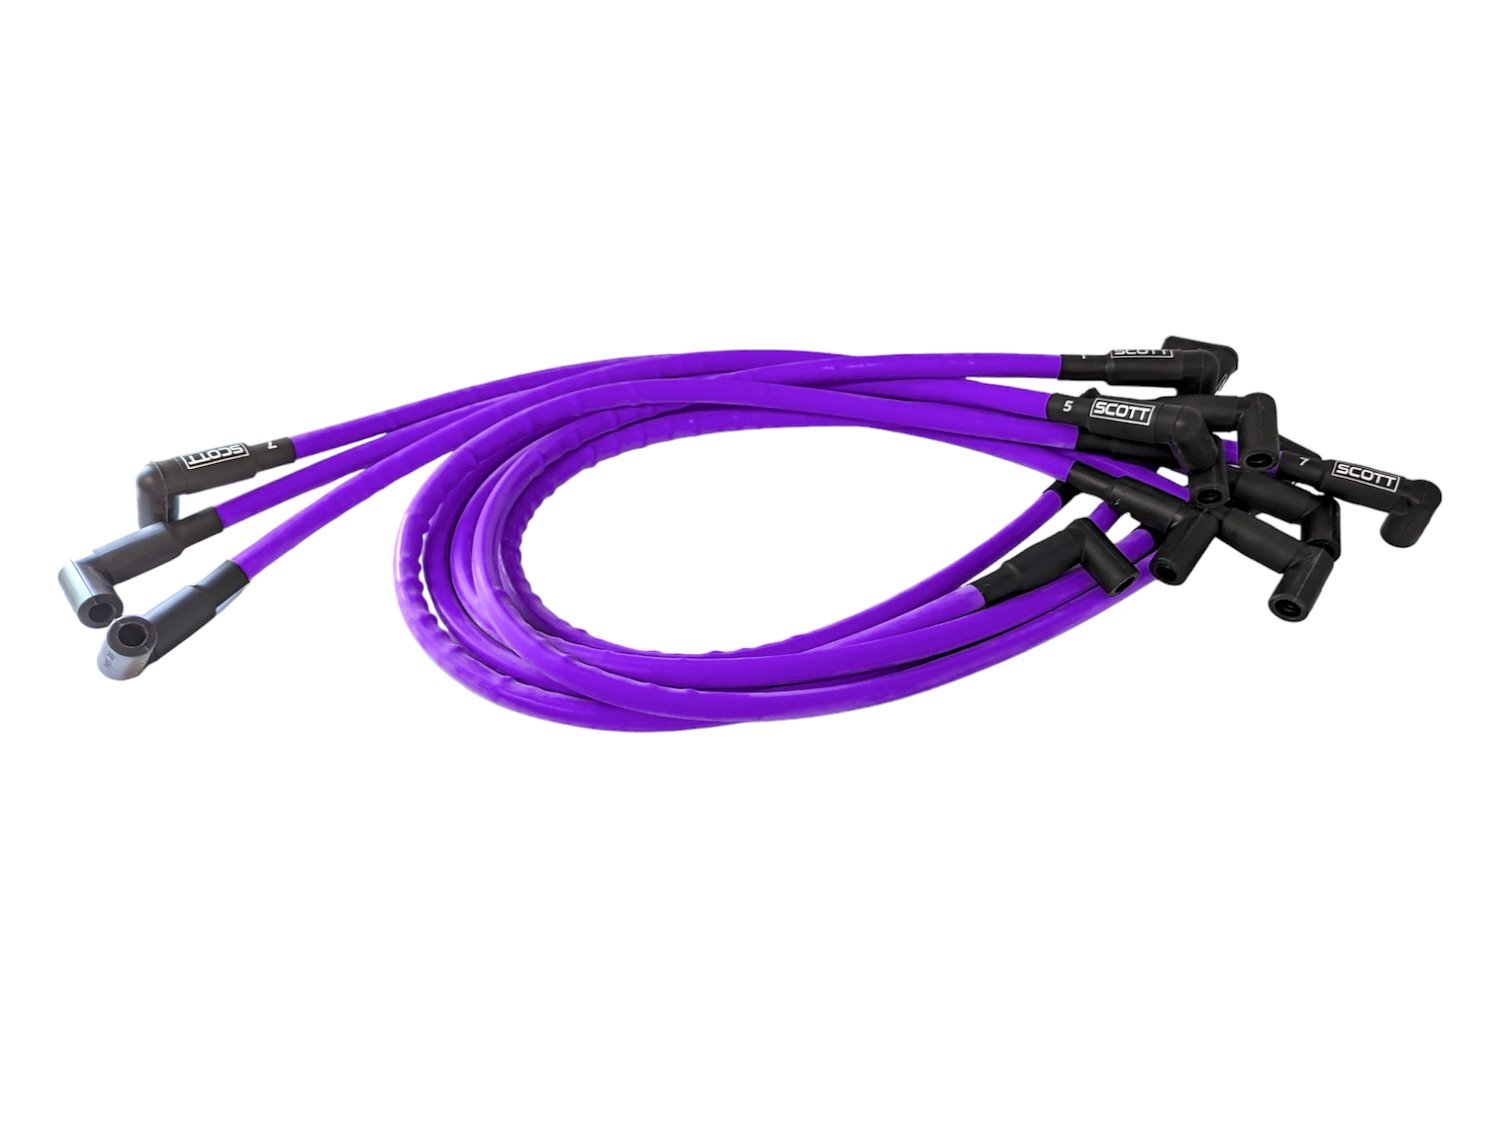 SPW-CH-516-6 High-Performance Silicone-Sleeved Spark Plug Wire Set for Big Block Chevy Dragster, Under Header [Purple]